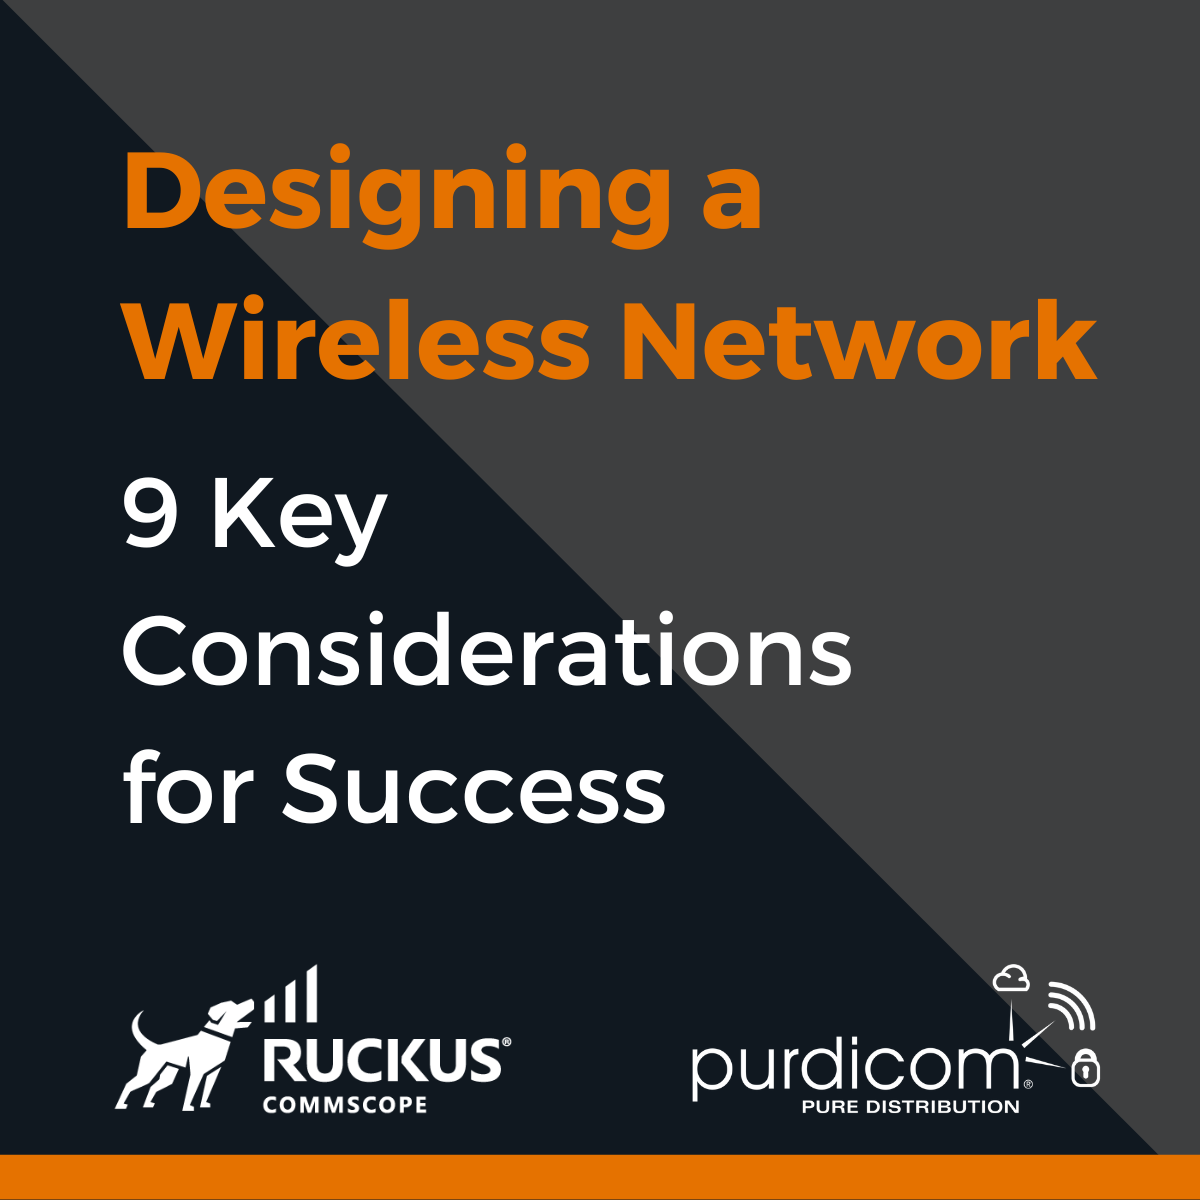 Designing a Wireless Network with Ruckus